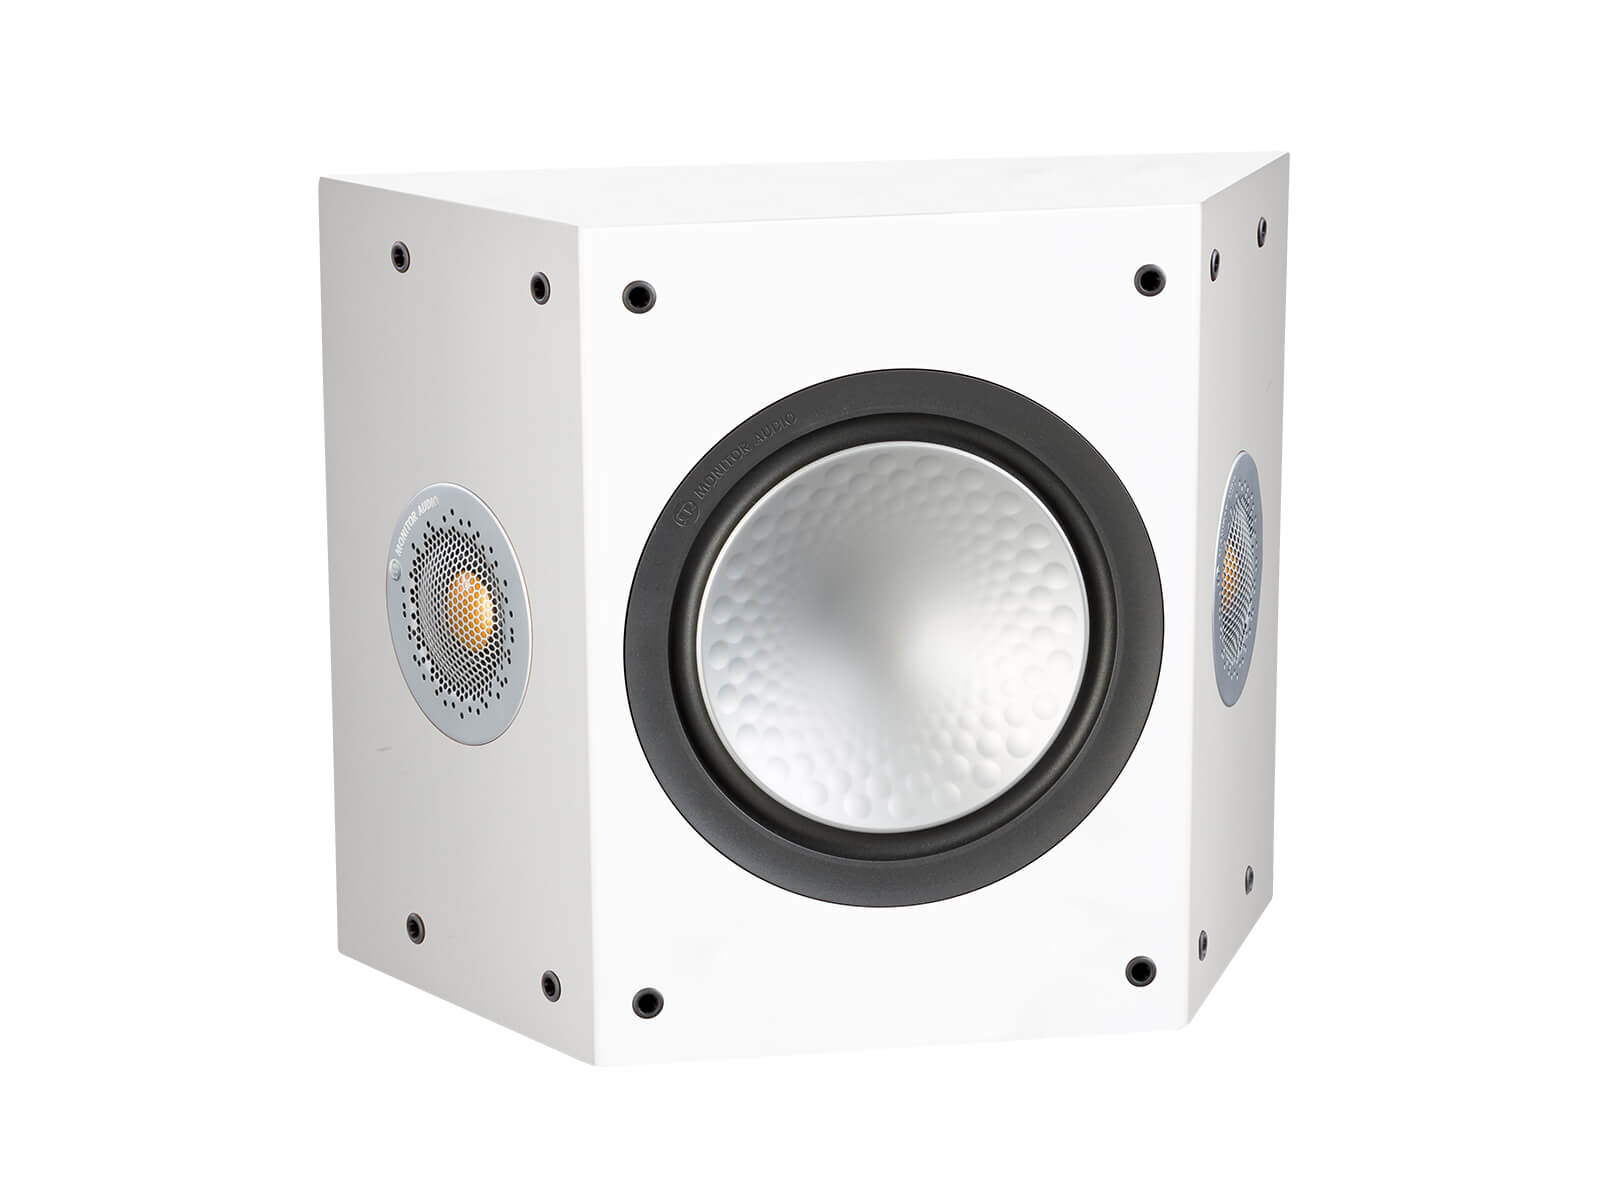 Silver FX, grille-less surround speakers, with a satin white finish.